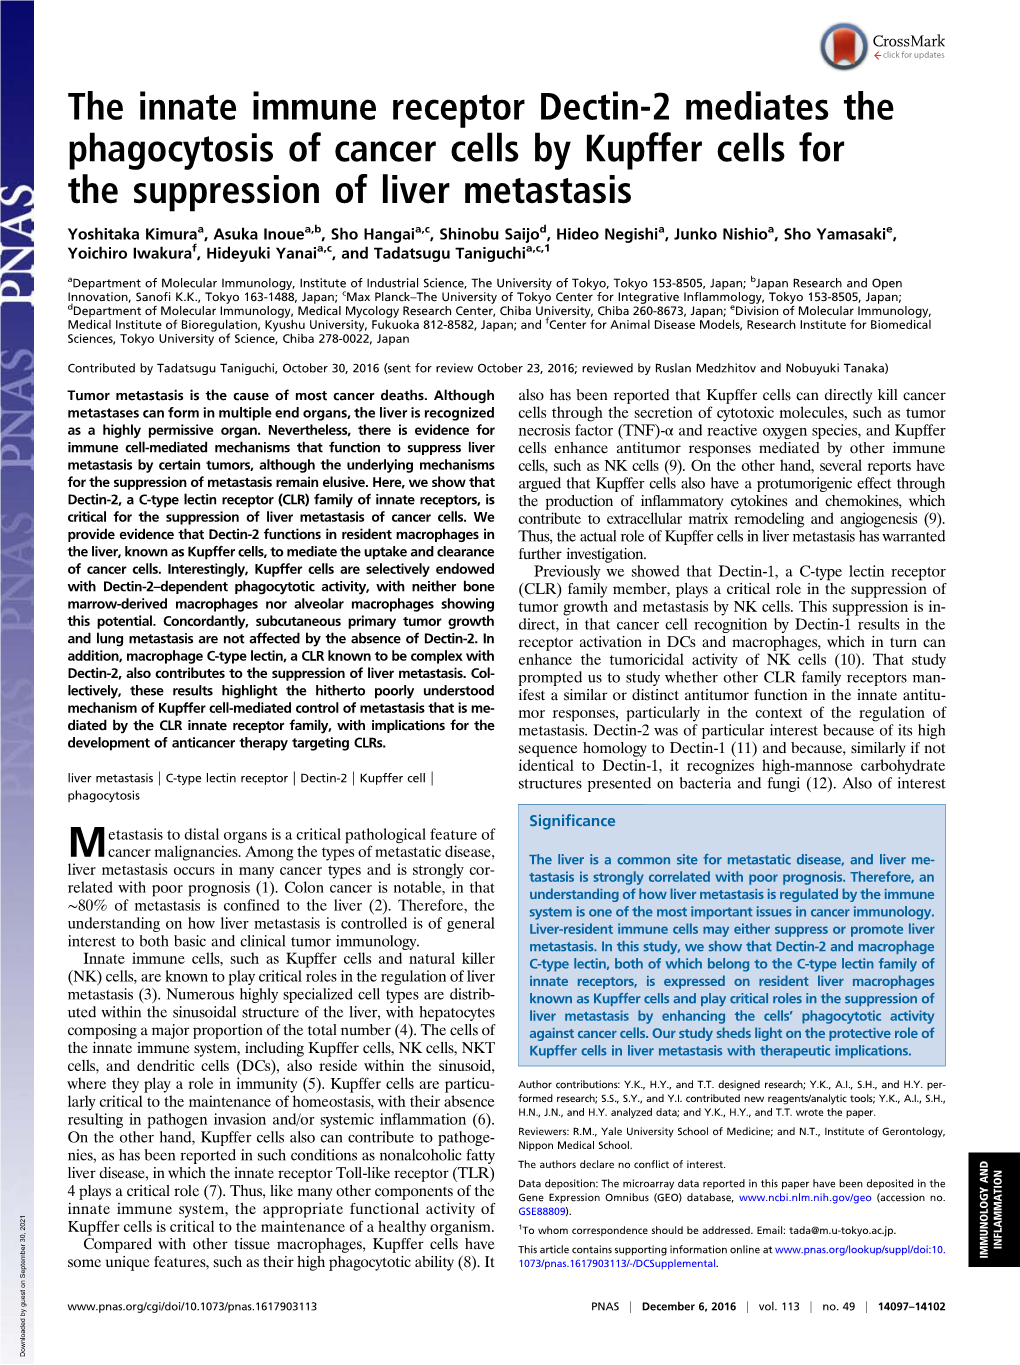 The Innate Immune Receptor Dectin-2 Mediates the Phagocytosis of Cancer Cells by Kupffer Cells for the Suppression of Liver Metastasis